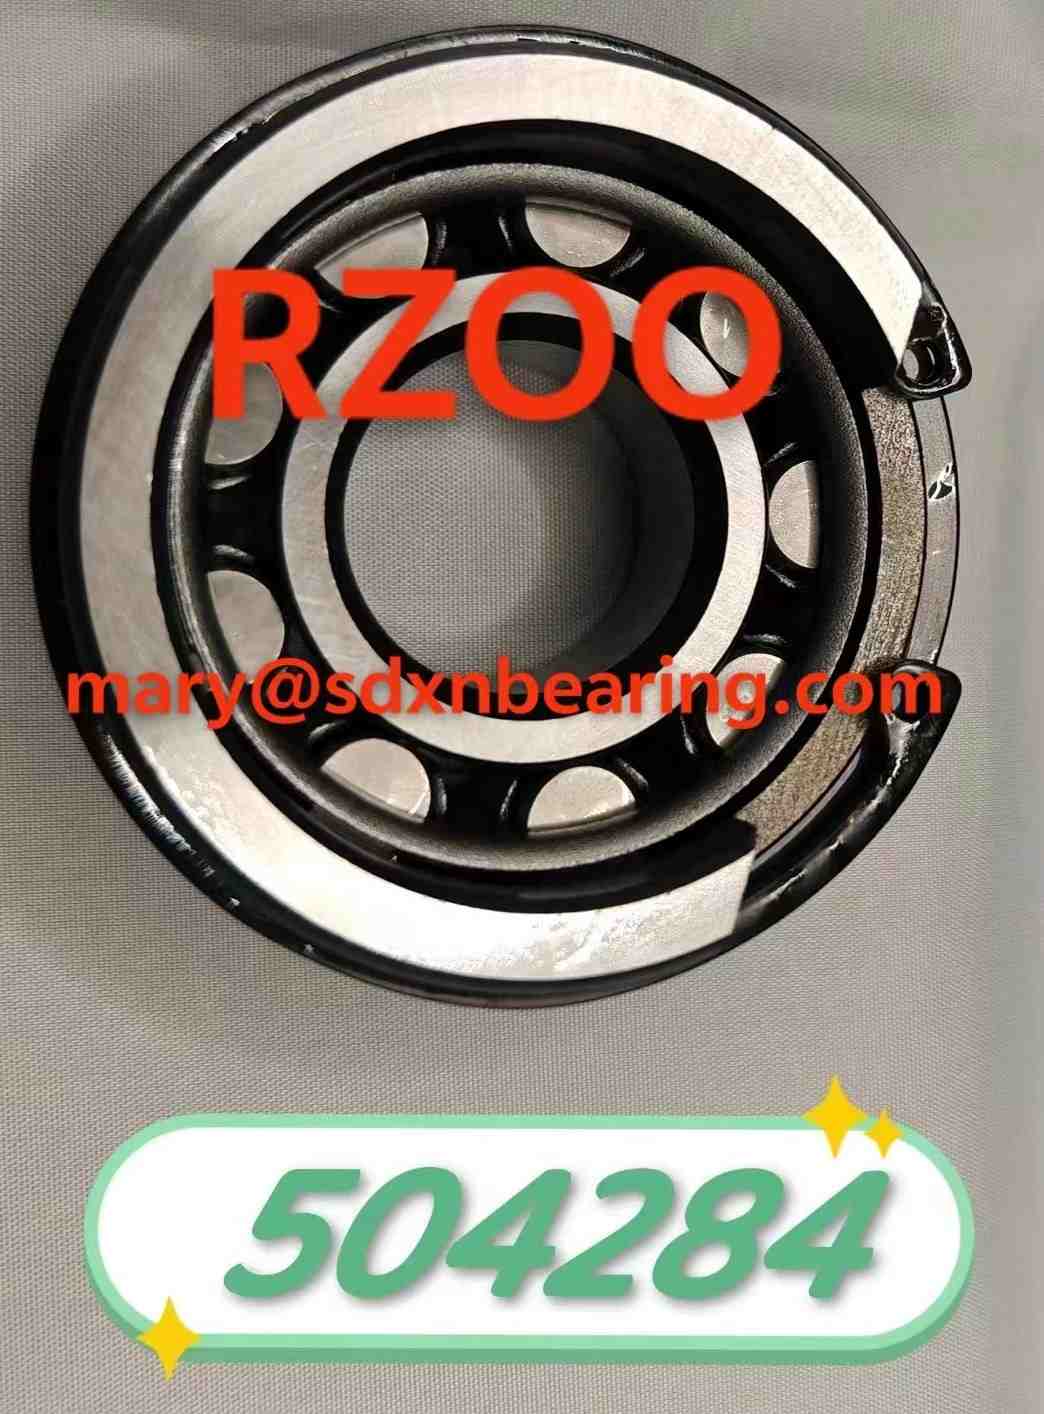 504284A Bearing -25x62x20mm-Cylindrical Roller Bearing